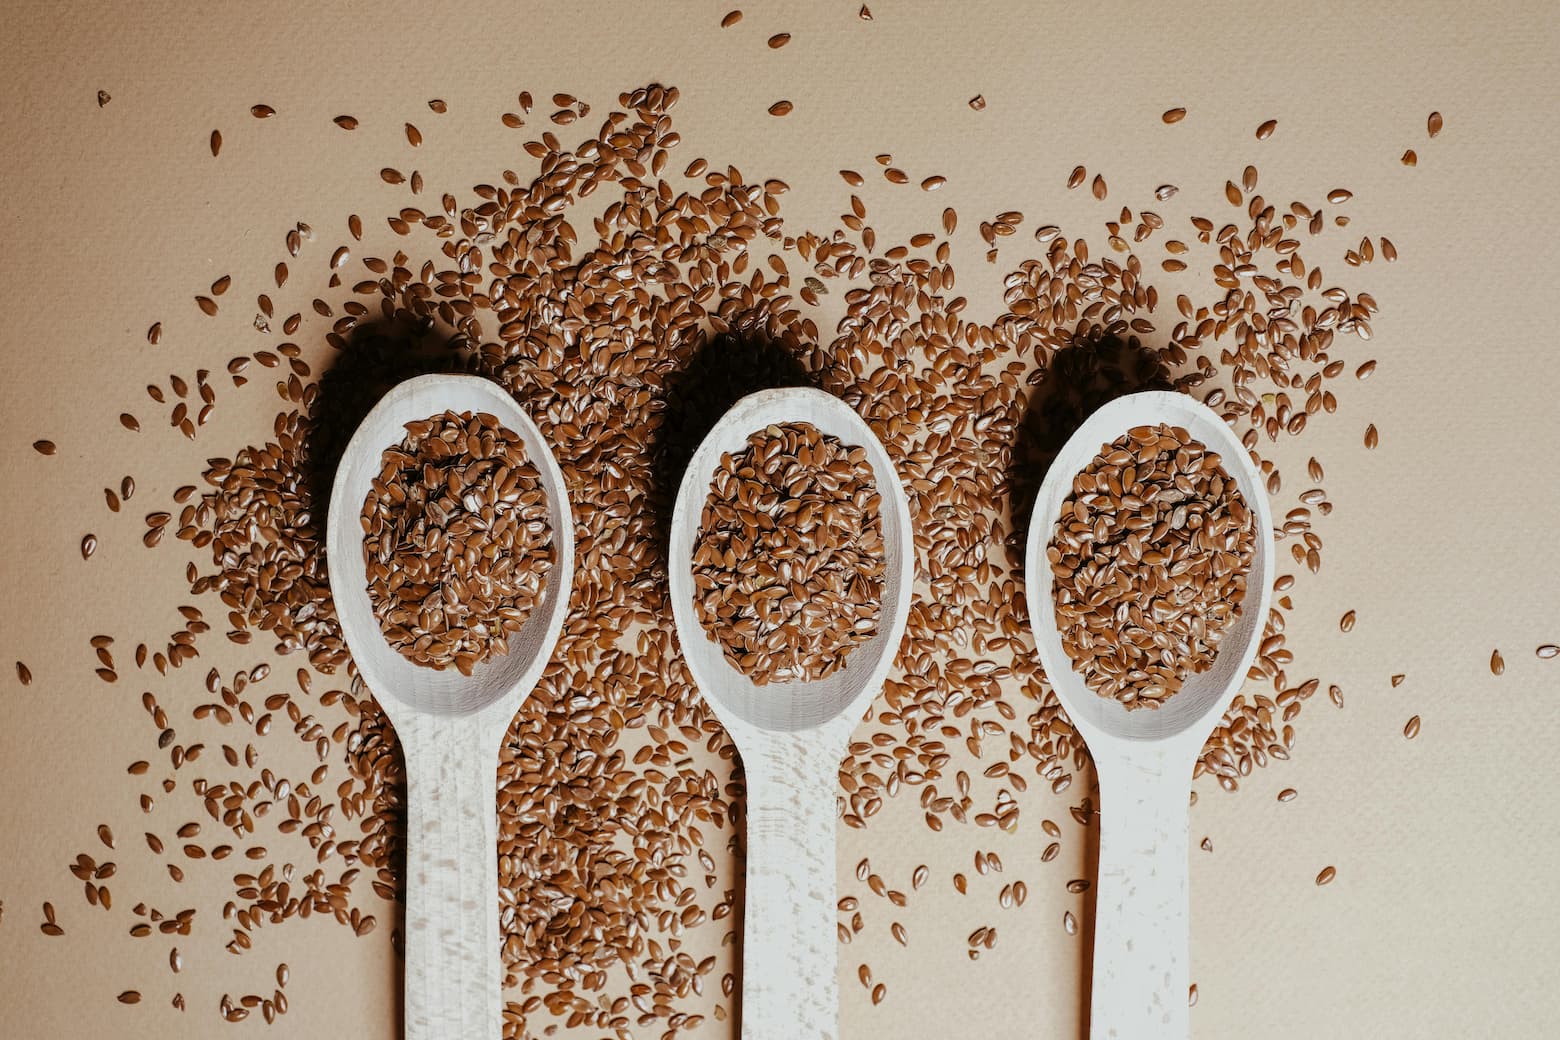 Boost Keto Results: Flax Seeds in Your Breakfast Routine